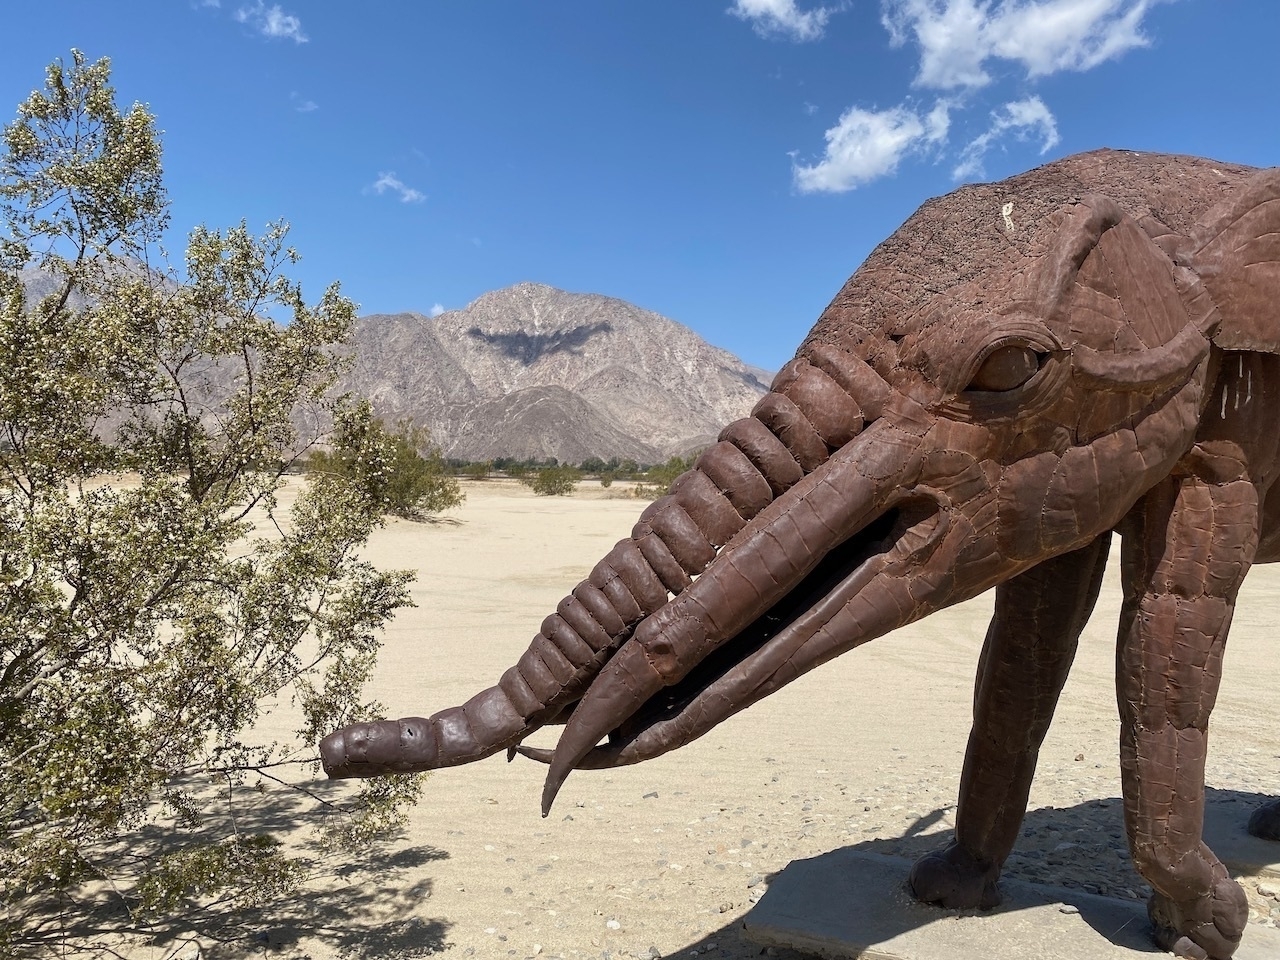 Gomphothere metal sculpture